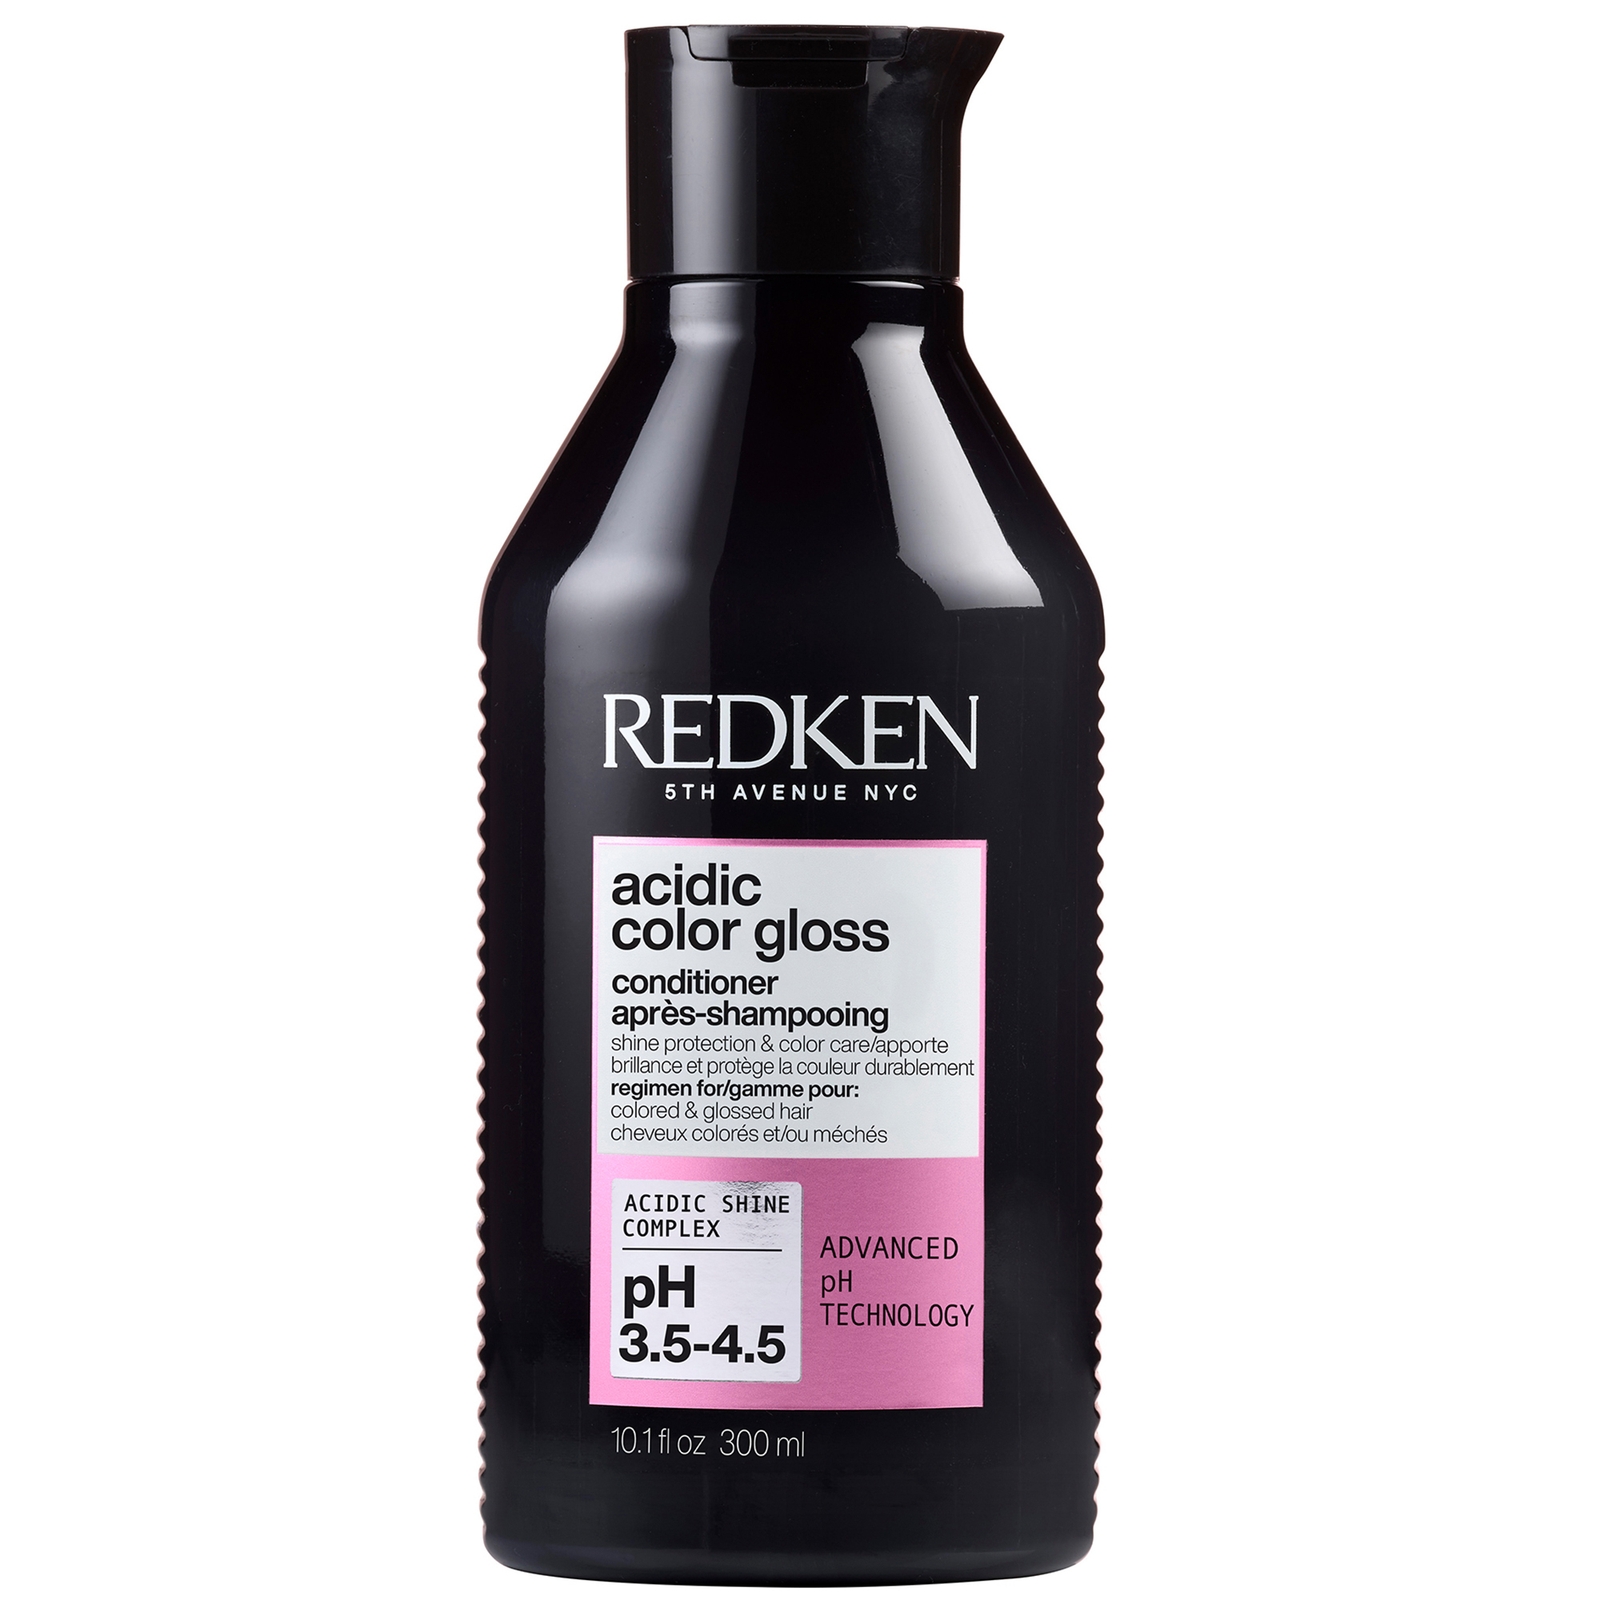 Redken Acidic Color Gloss Conditioner for Colour Protection, Glass-Like Shine for Colour Treated Hai